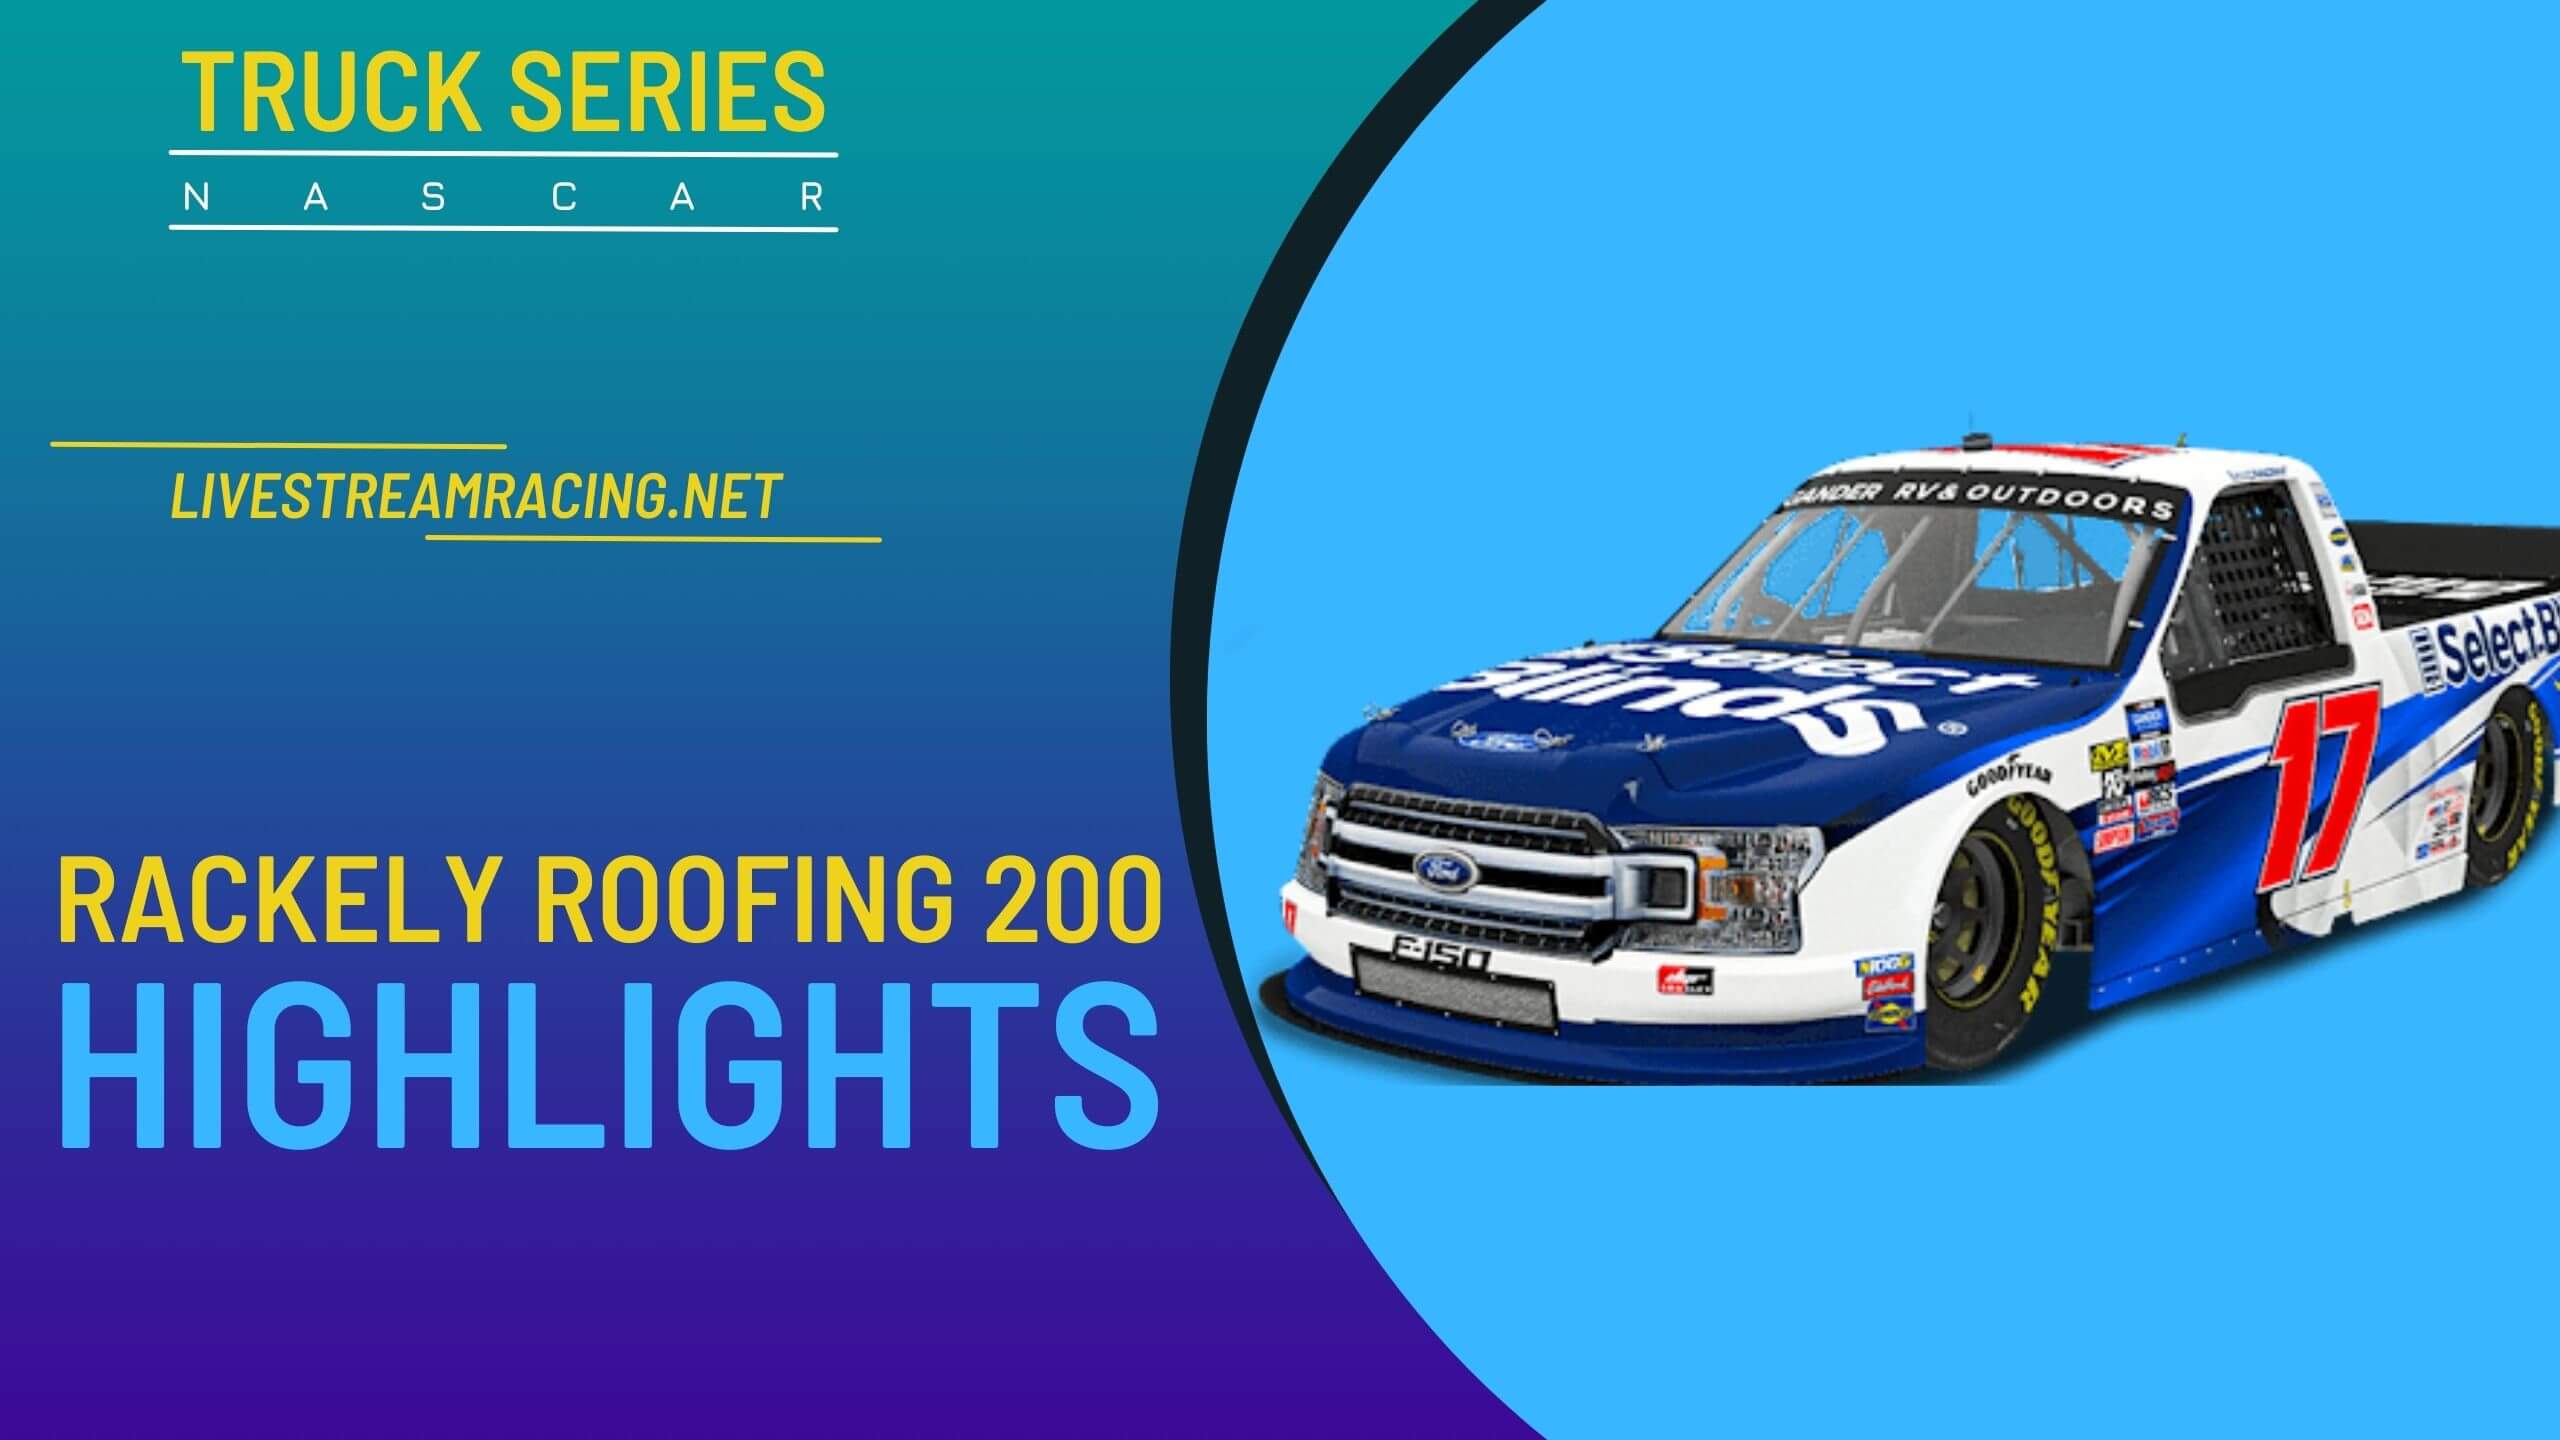 Rackley Roofing 200 Nascar Highlights 2022 Truck Series